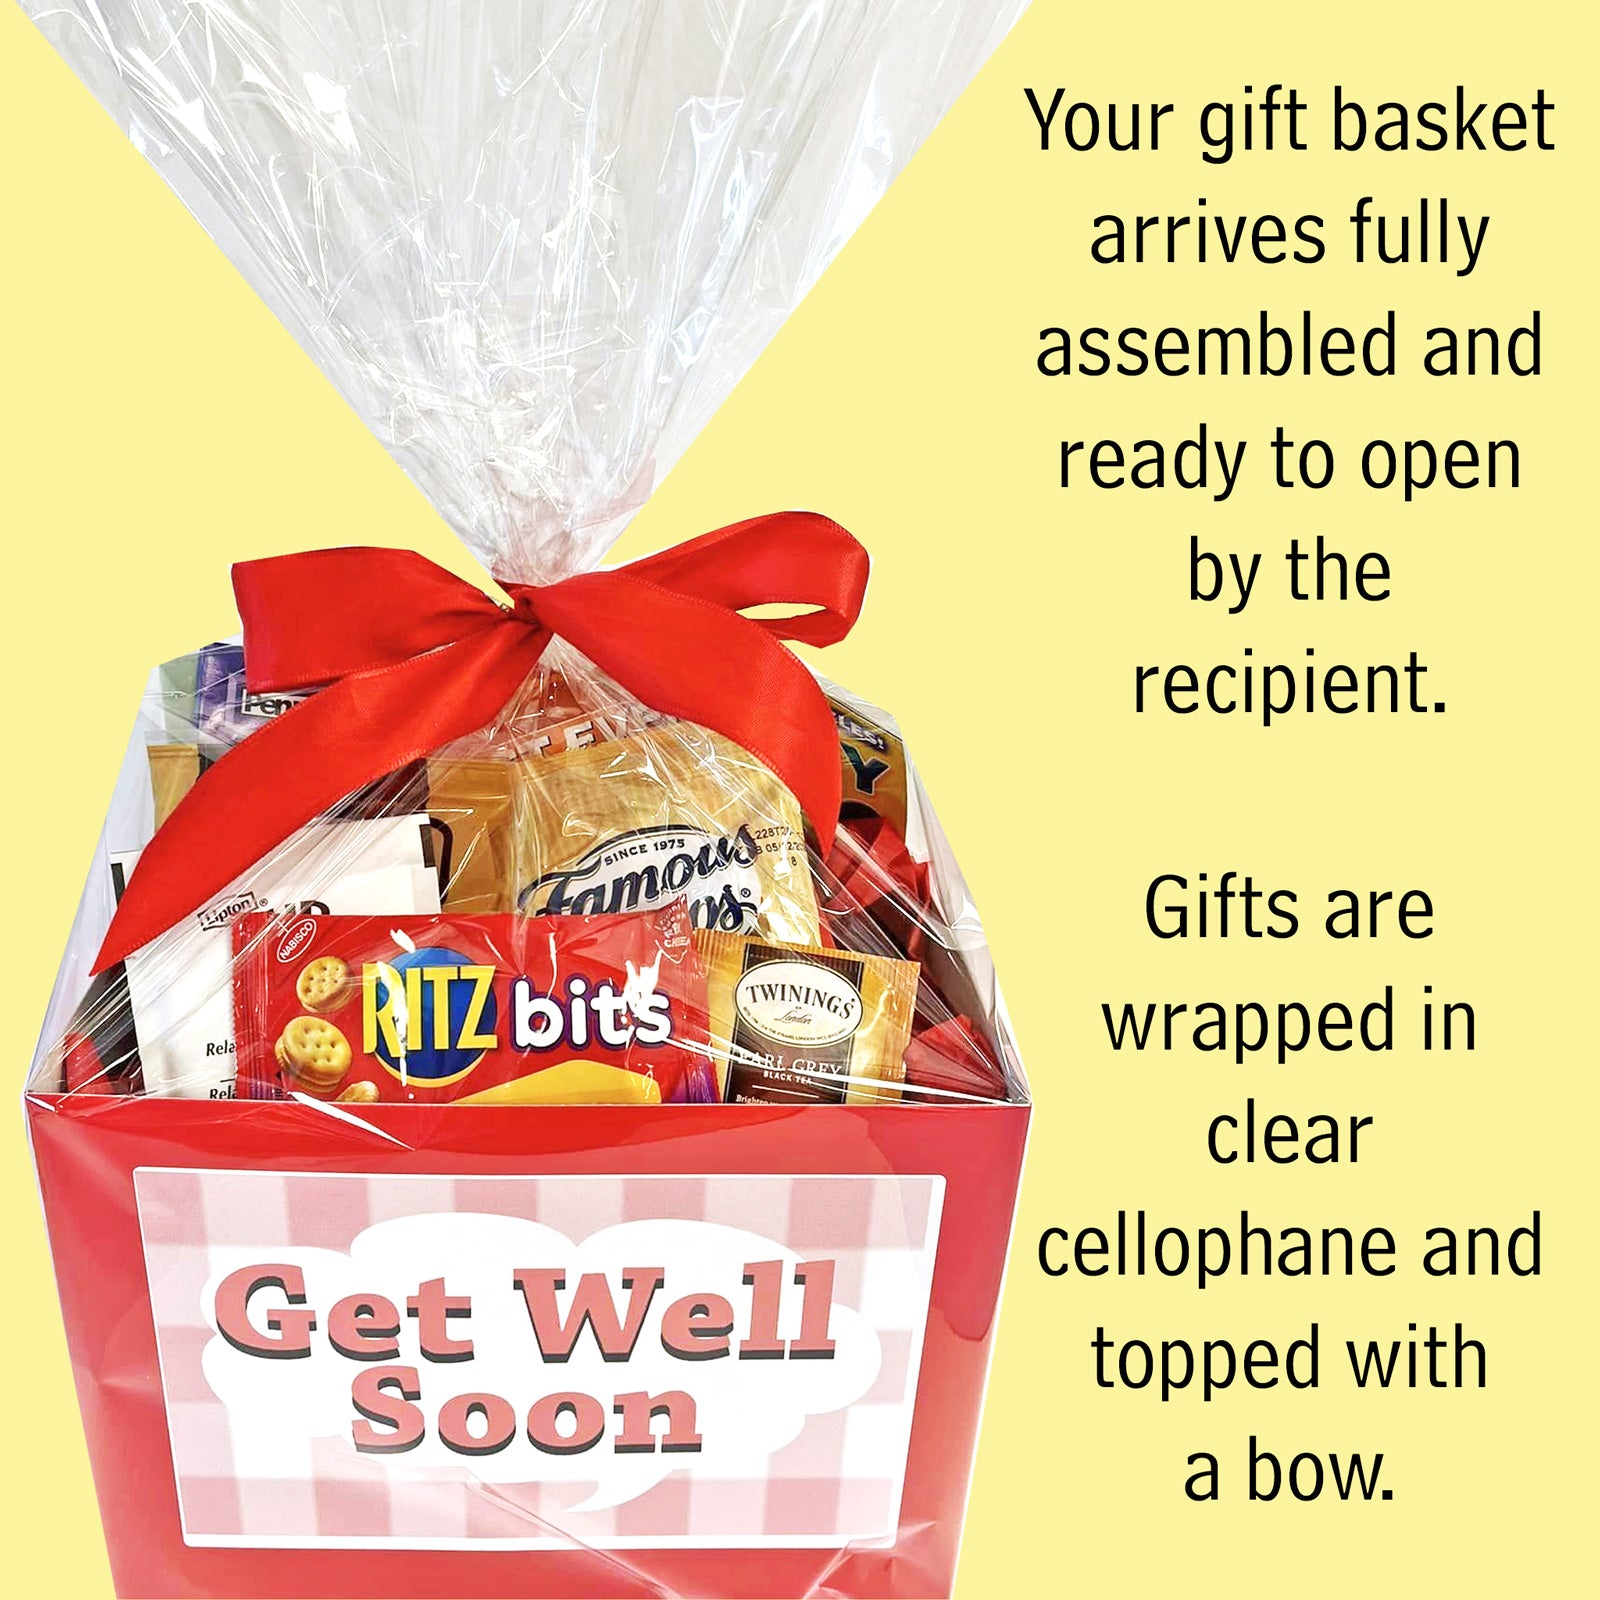 Get Well Soon Gifts for Women, Self Care Package, After Surgery Recovery,  Thinking of You, Sympathy Gift Basket, Feel Better Gifts for Sick Friend